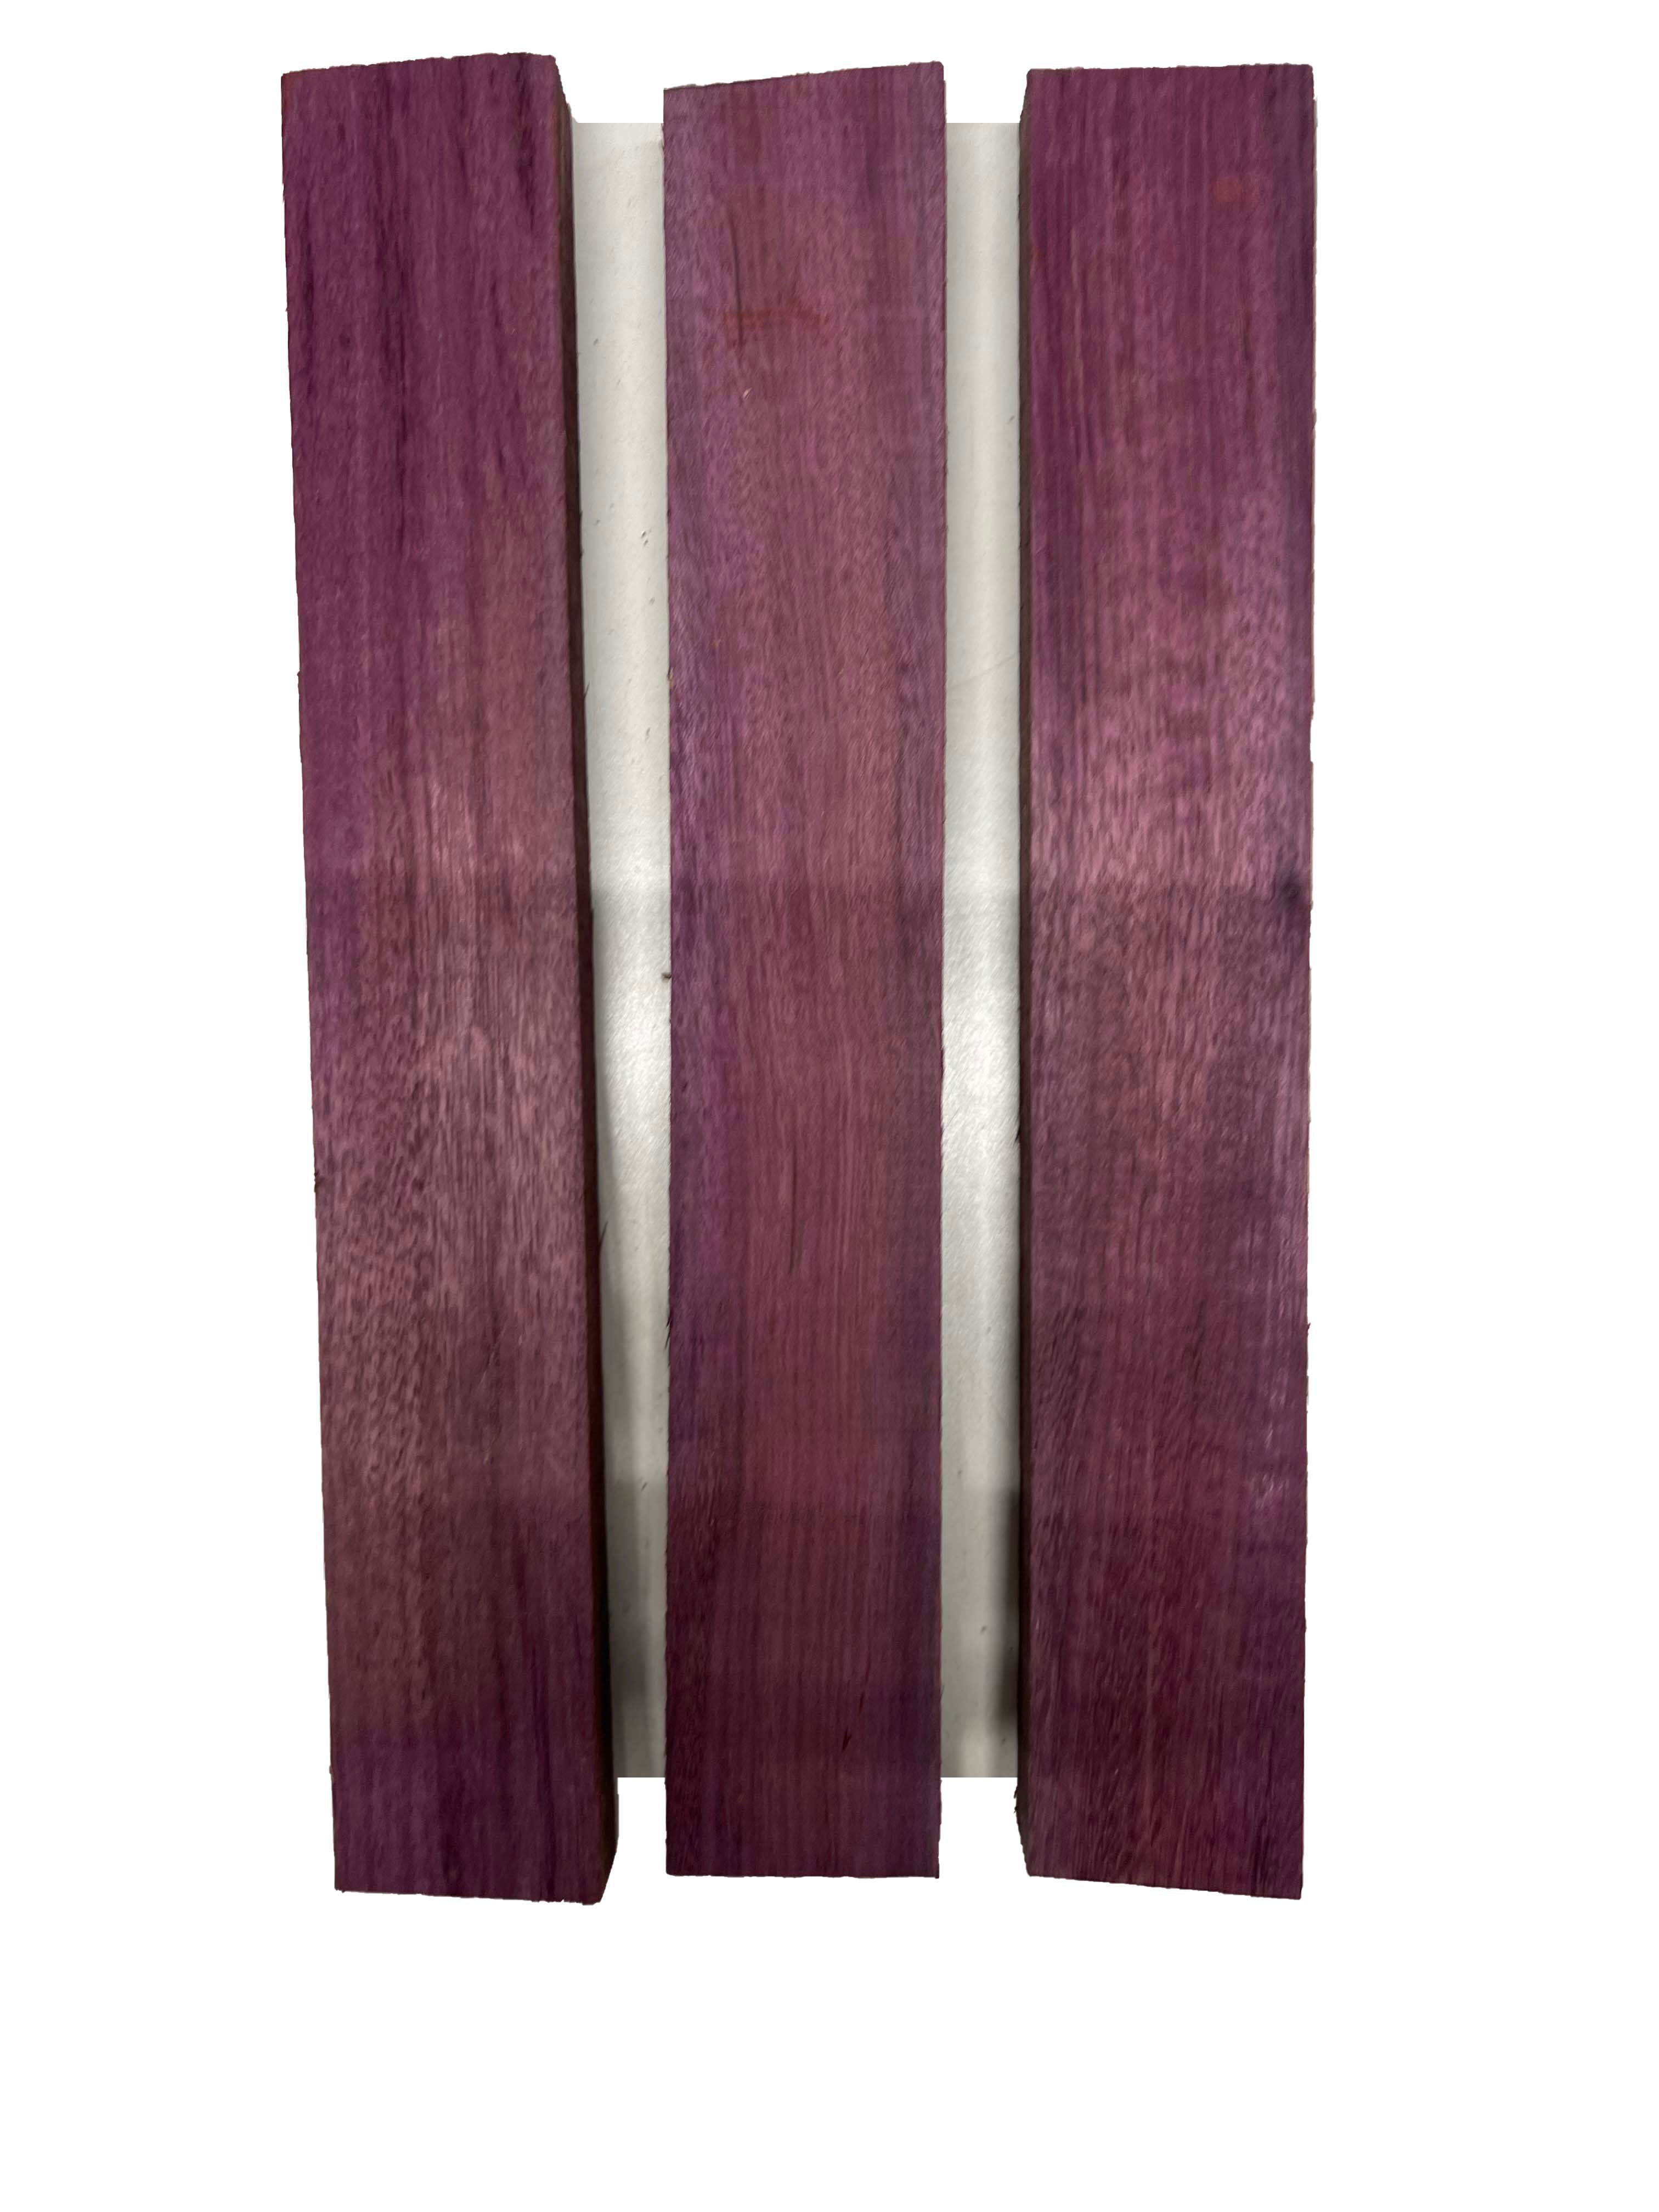 Pack Of 3, Purpleheart Thin Stock Three Dimensional Lumber Wood Blank 14&quot;x2&quot;x3/4&quot; 